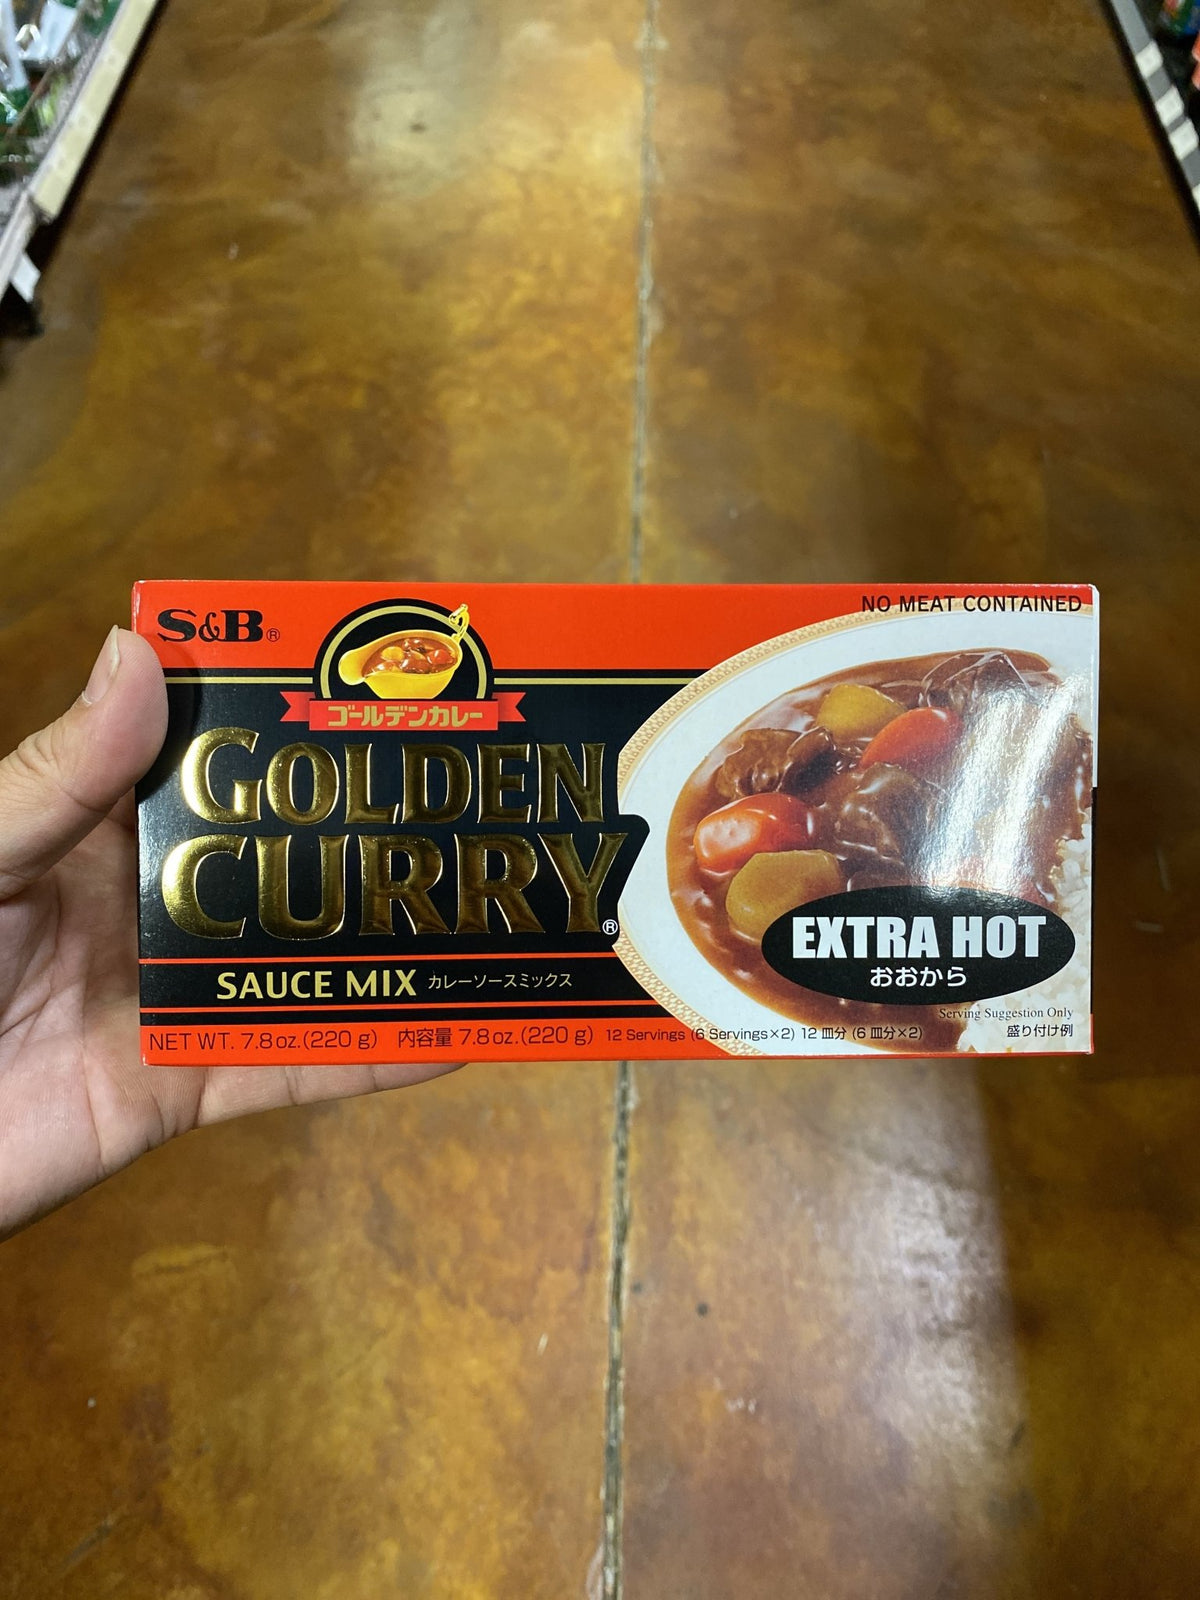 S&B Golden Curry Hot - Crate2Plate